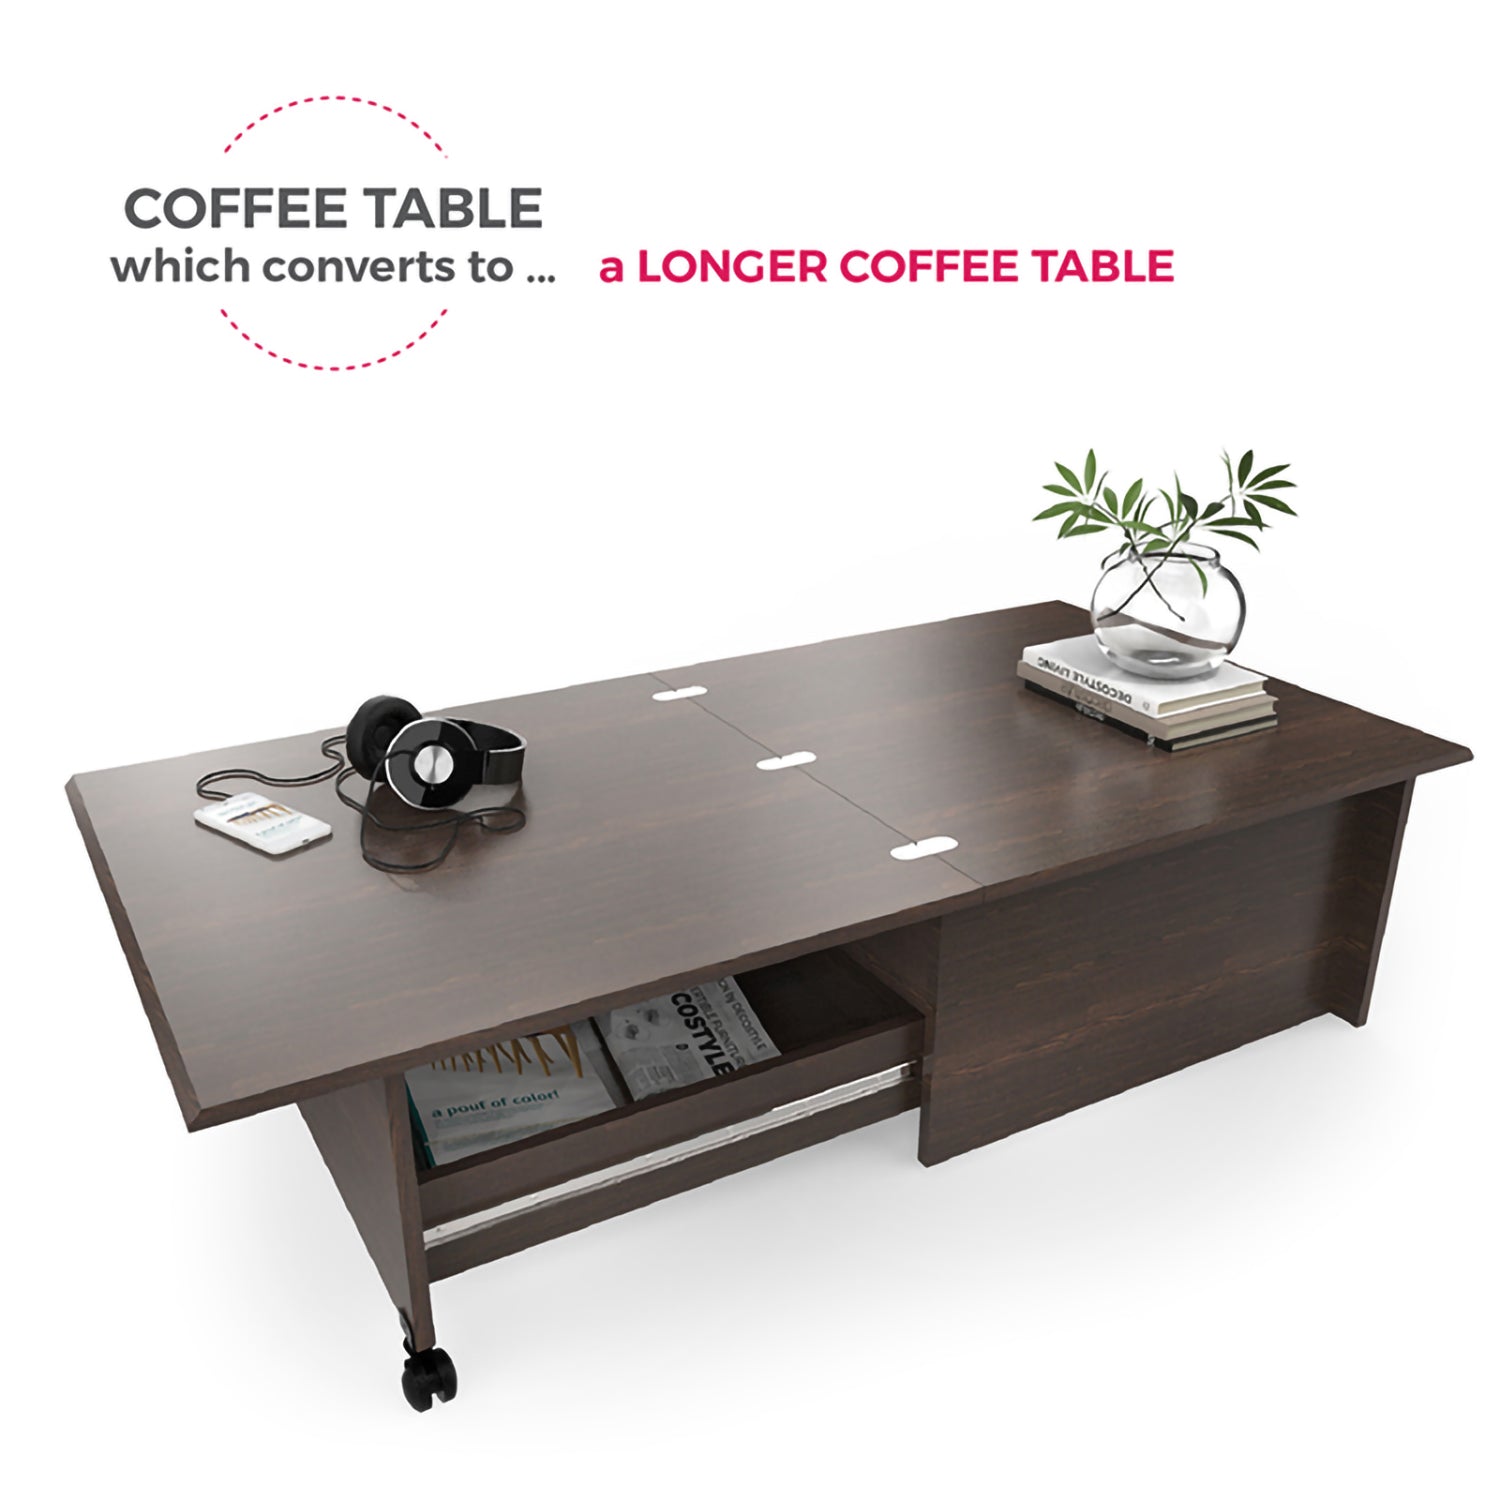 DECOSTYLE DC2D101 WES Multipurpose Coffee Table Wenge